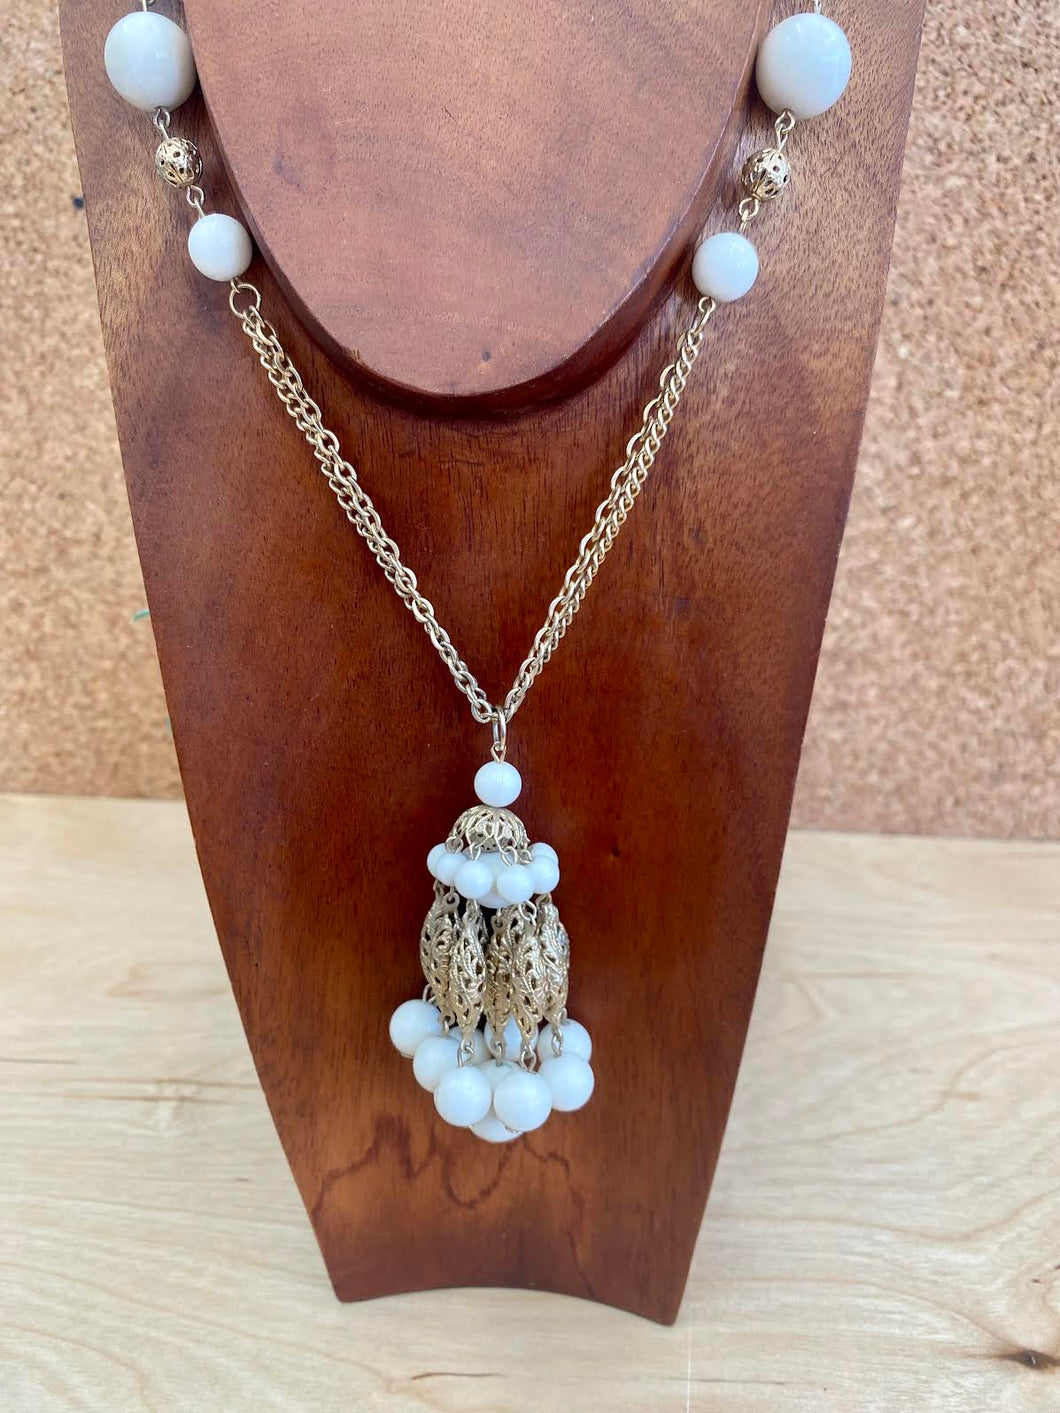 White Bead and Filigree Vintage Necklace